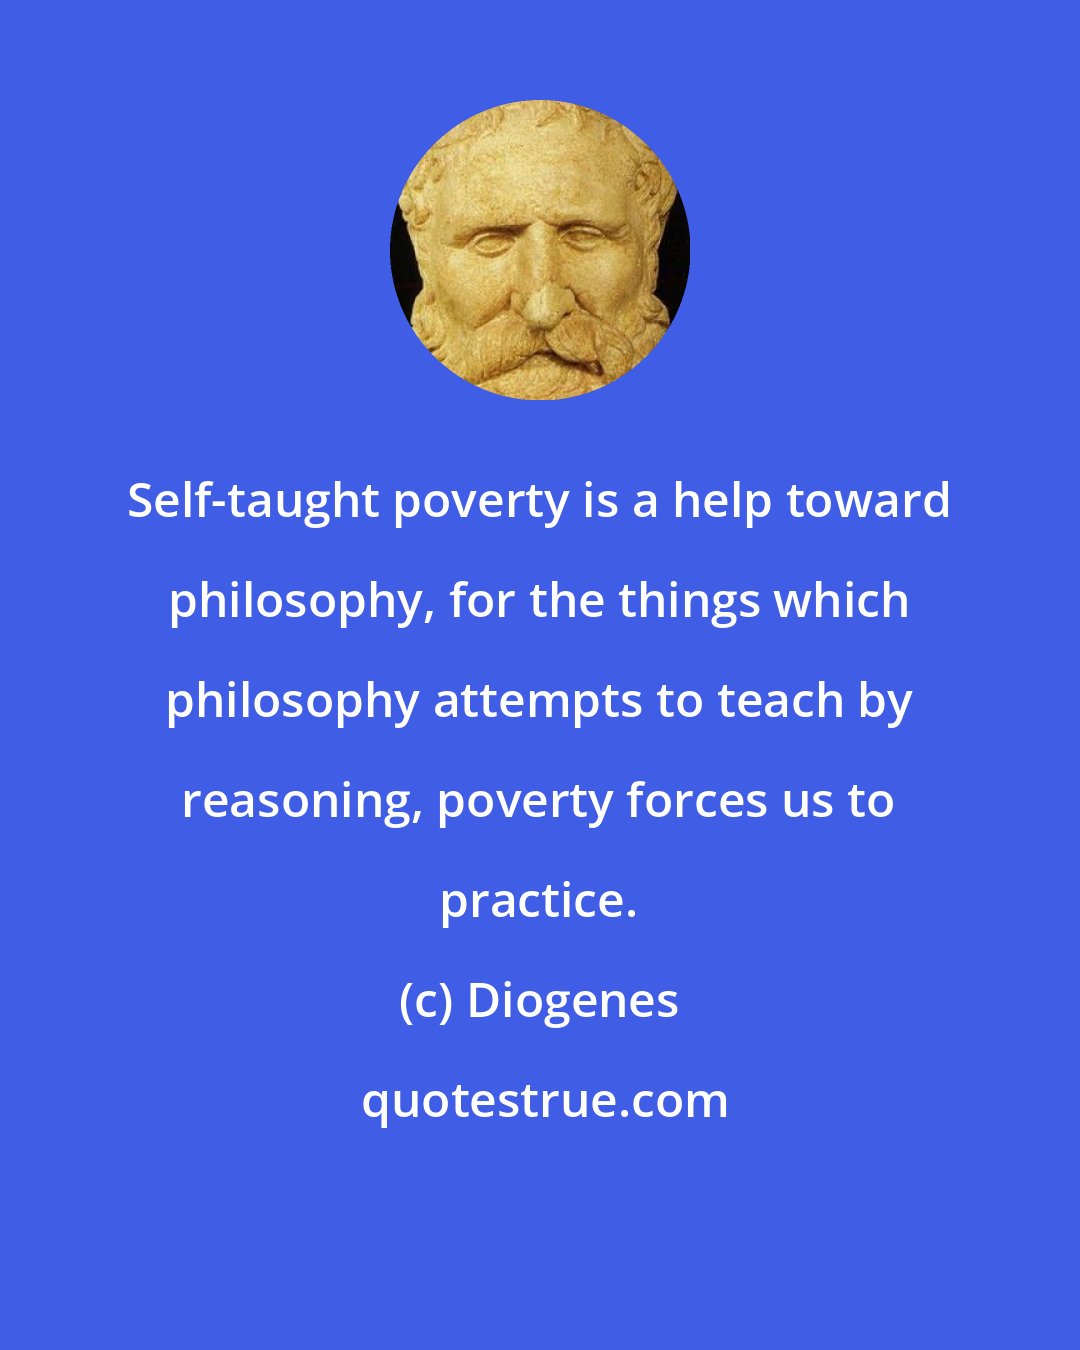 Diogenes: Self-taught poverty is a help toward philosophy, for the things which philosophy attempts to teach by reasoning, poverty forces us to practice.